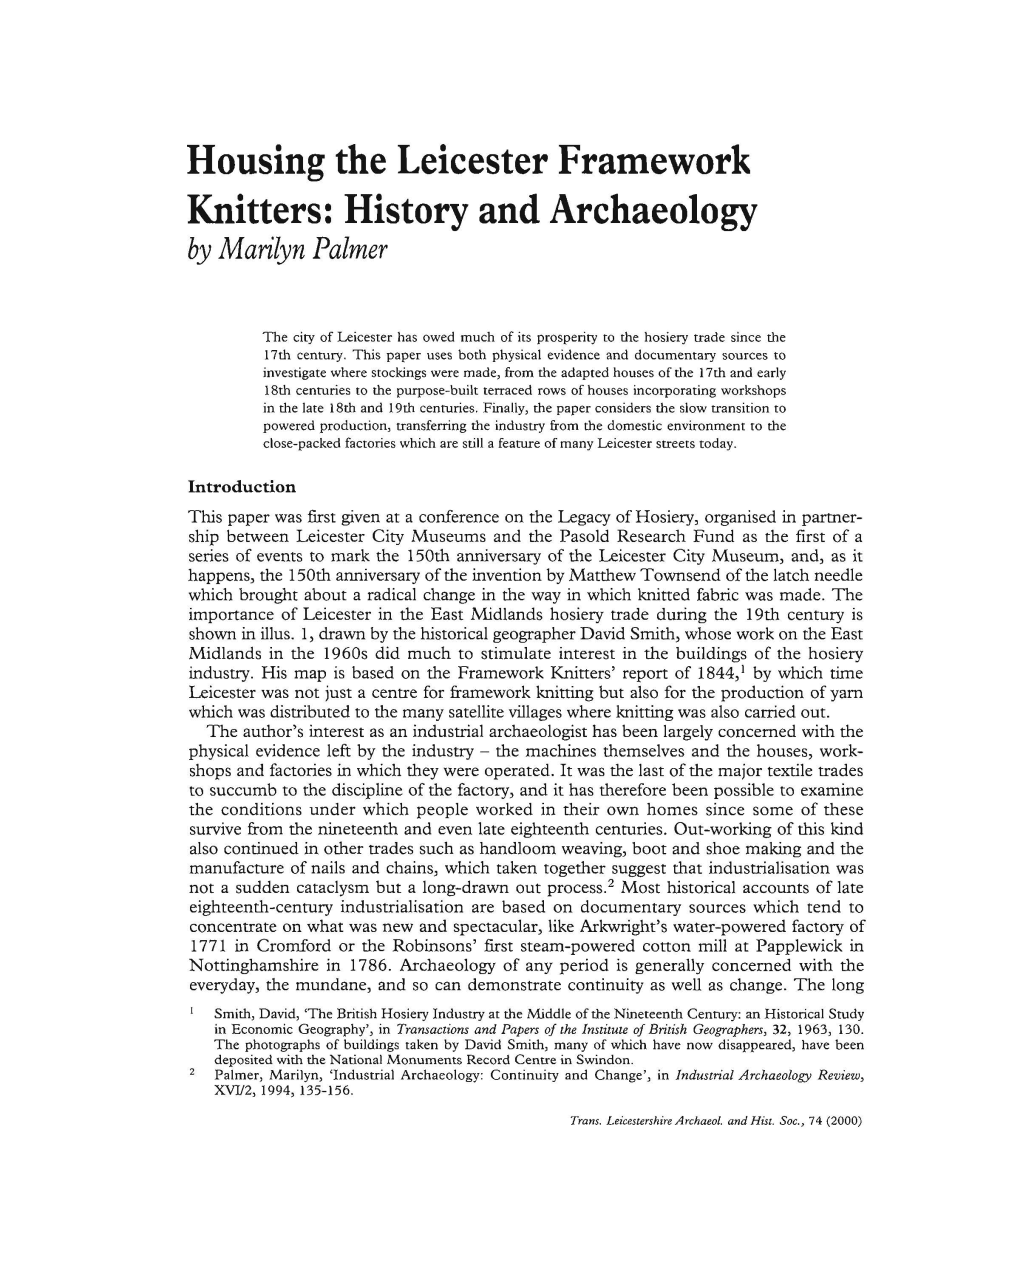 Housing the Leicester Framework Knitters: History and Archaeology by Marilyn Palmer